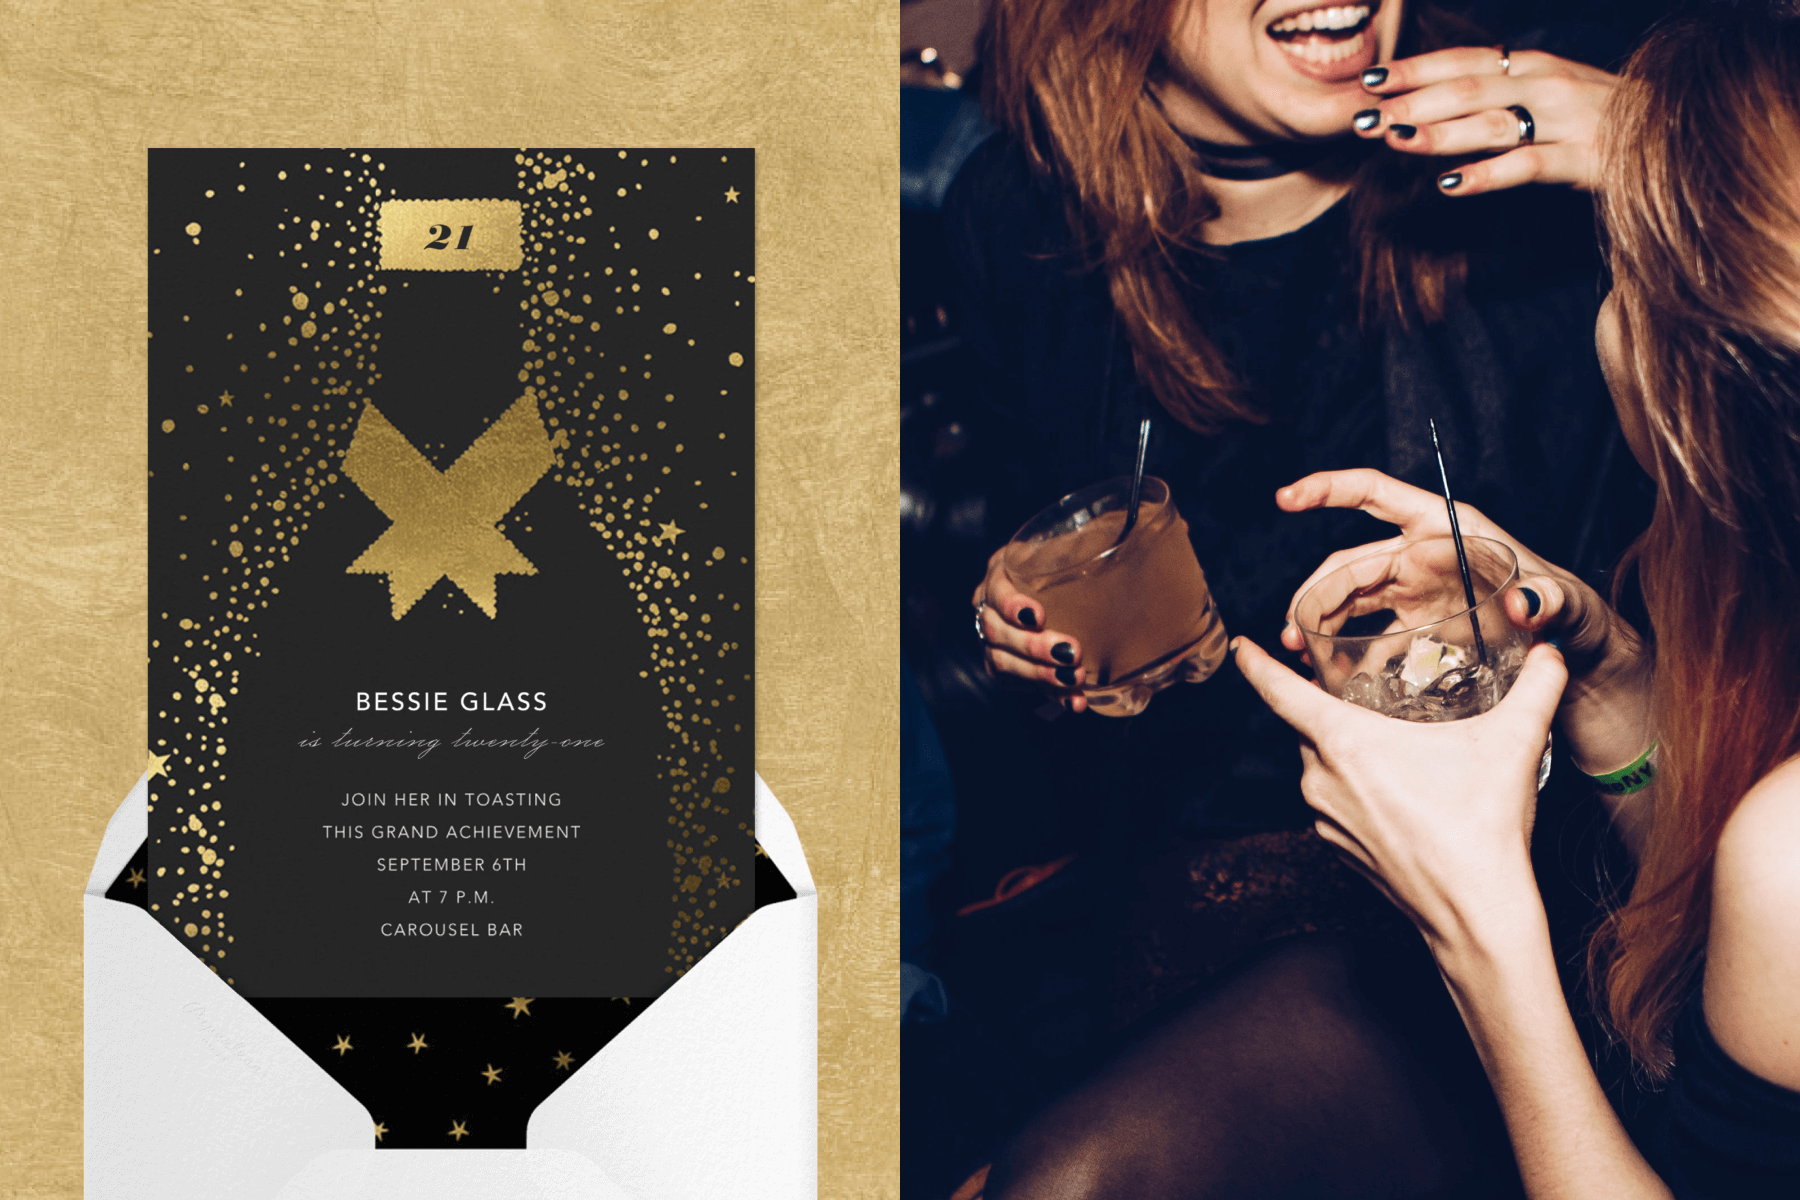 Left: A 21st birthday invitation featuring a black champaign bottle on a gold and black card. Right: A nighttime close-up of two women’s hands holding cocktails.